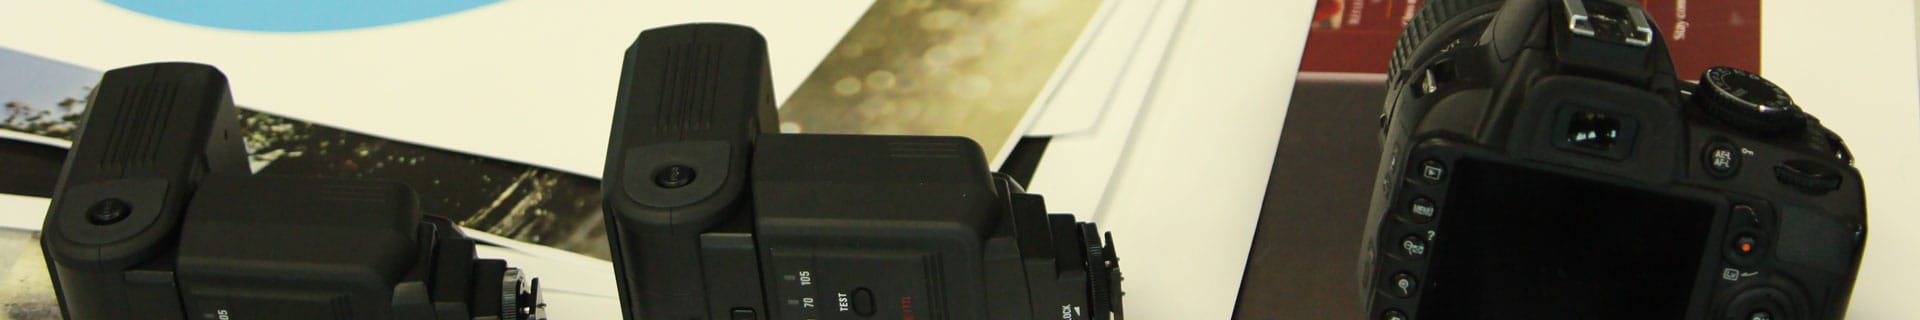 Digital camera and other equipment lay on a work table.